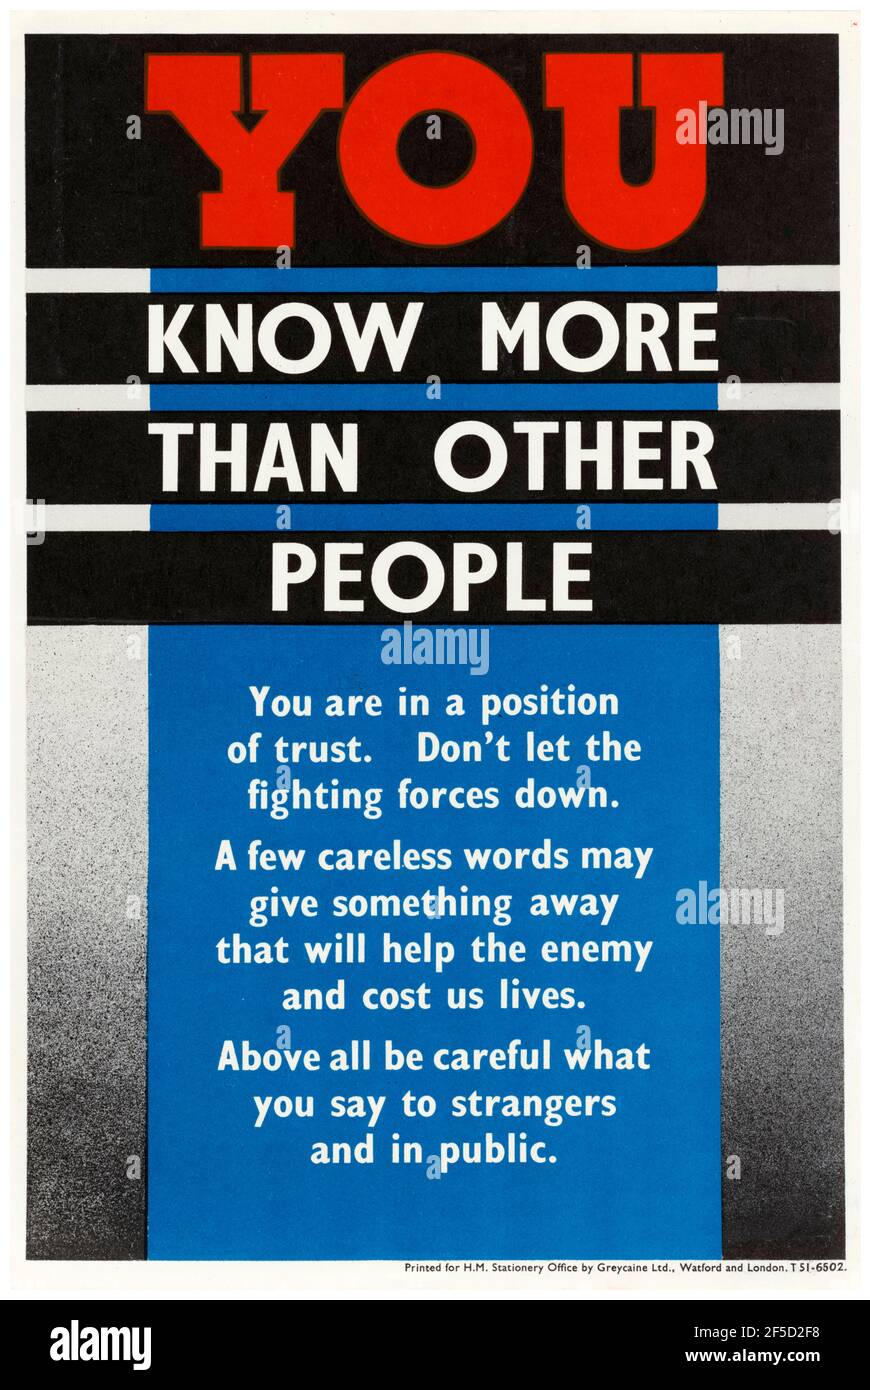 You Know More than other people, Careless Talk, British, WW2 Public Information Poster, 1942-1945 Stockfoto